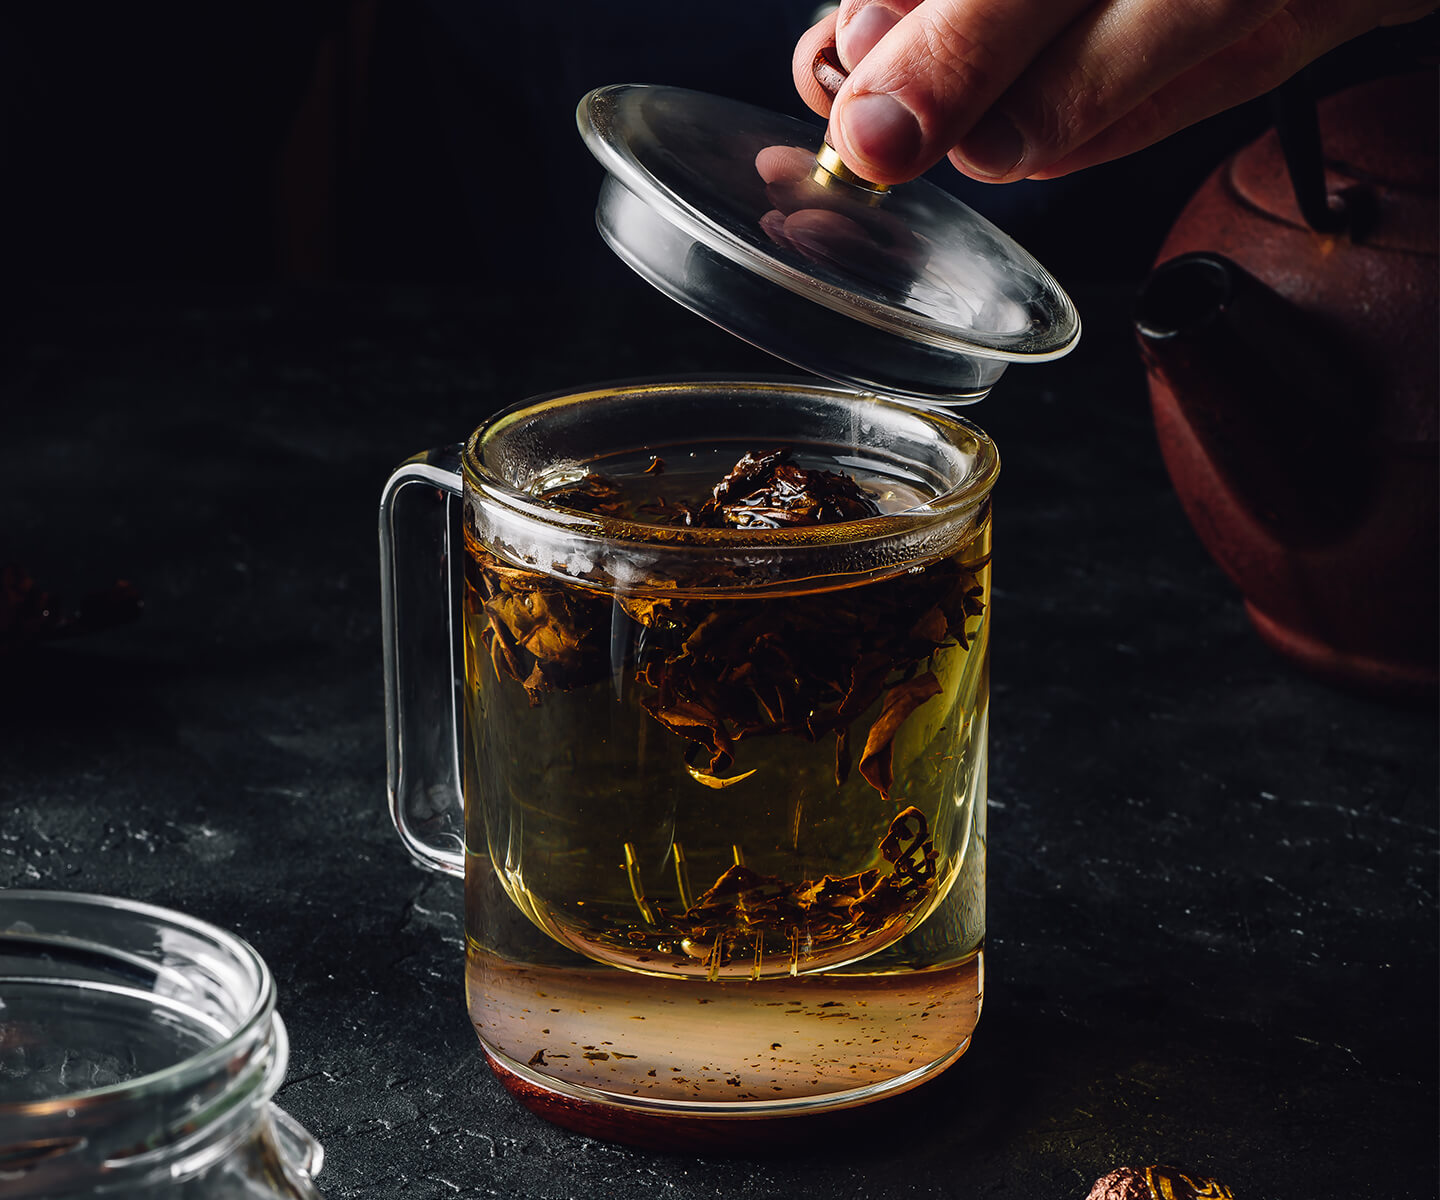 Man stteping a cup of oolong loose leaf tea in a glass mug